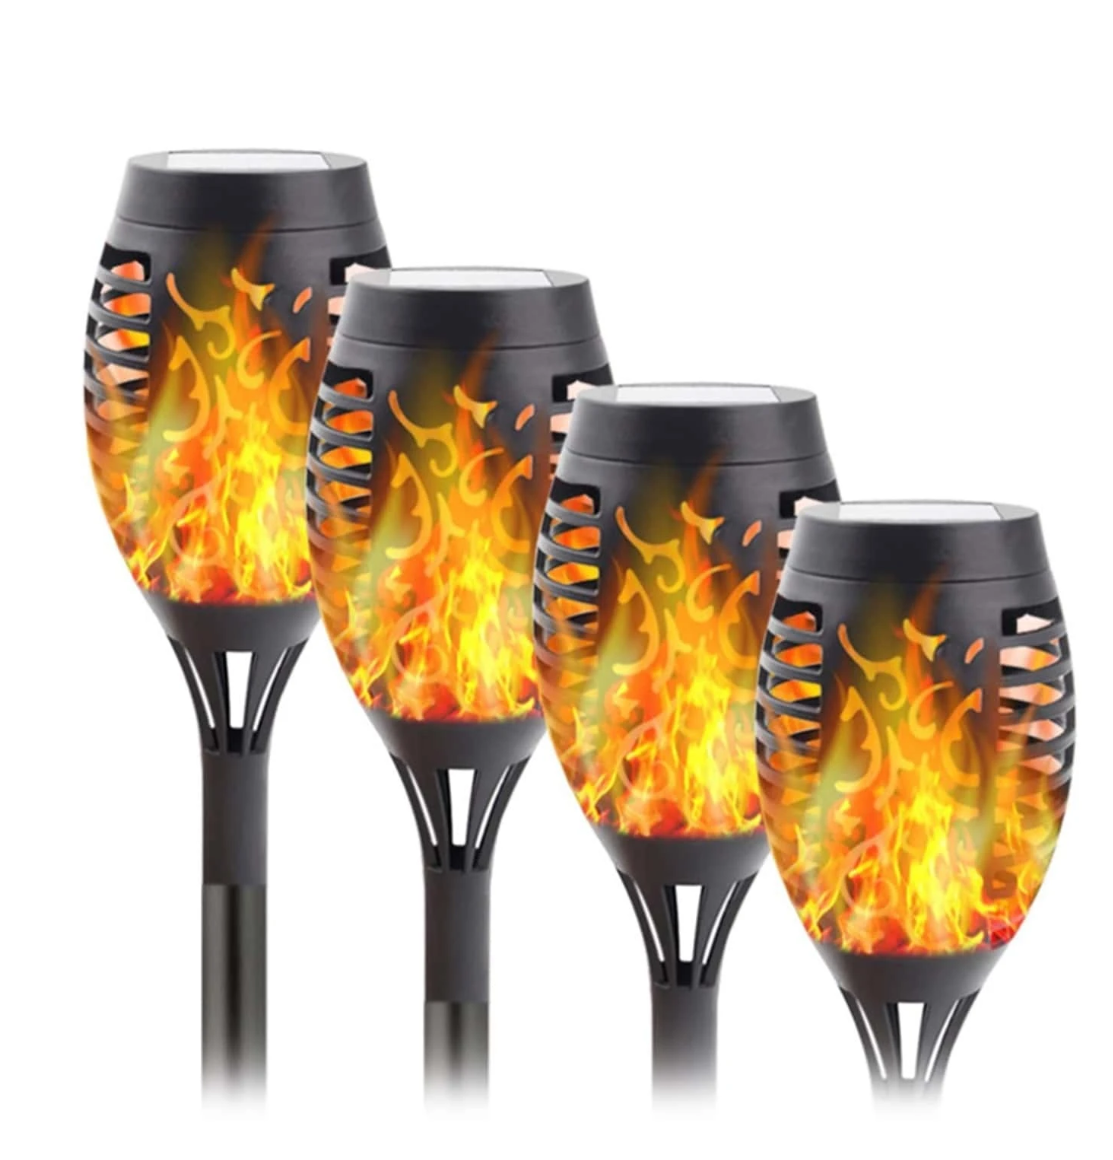 Solar Elegance: Set of 4 Flickering Flame Outdoor Lights for Garden Enchantment and Radiant Nights!